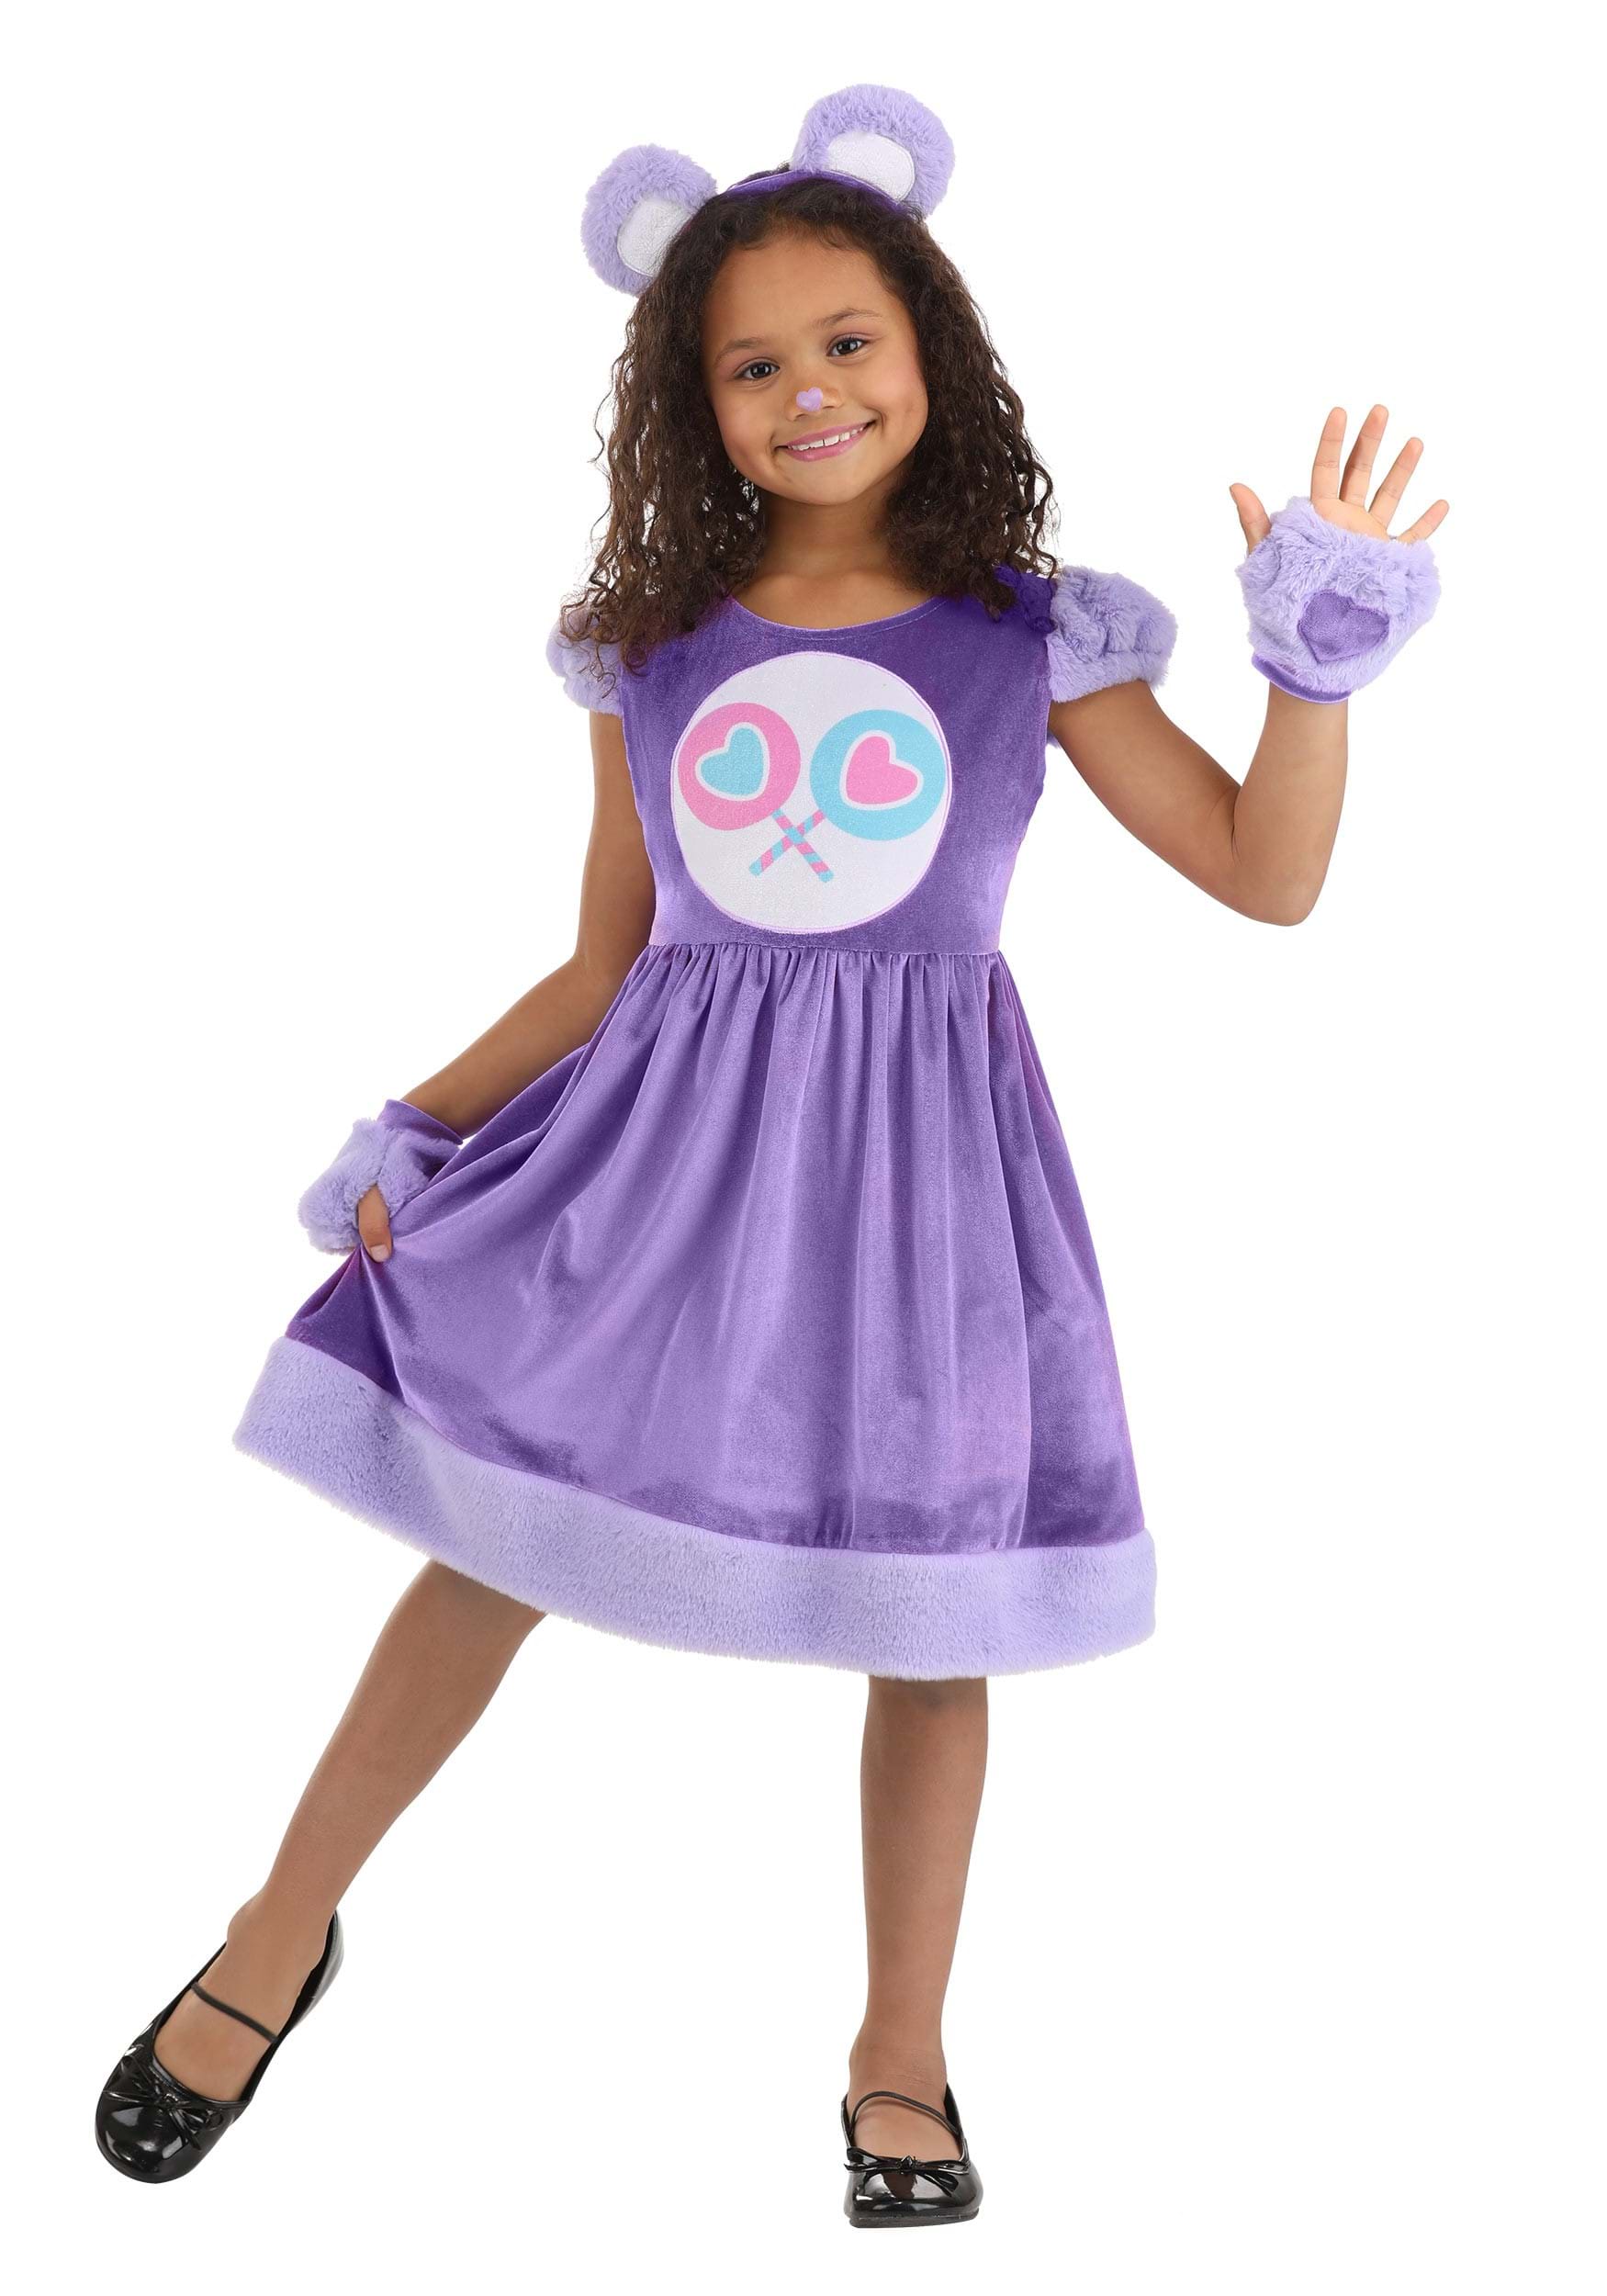 Share Bear Party Dress Costume for Girls